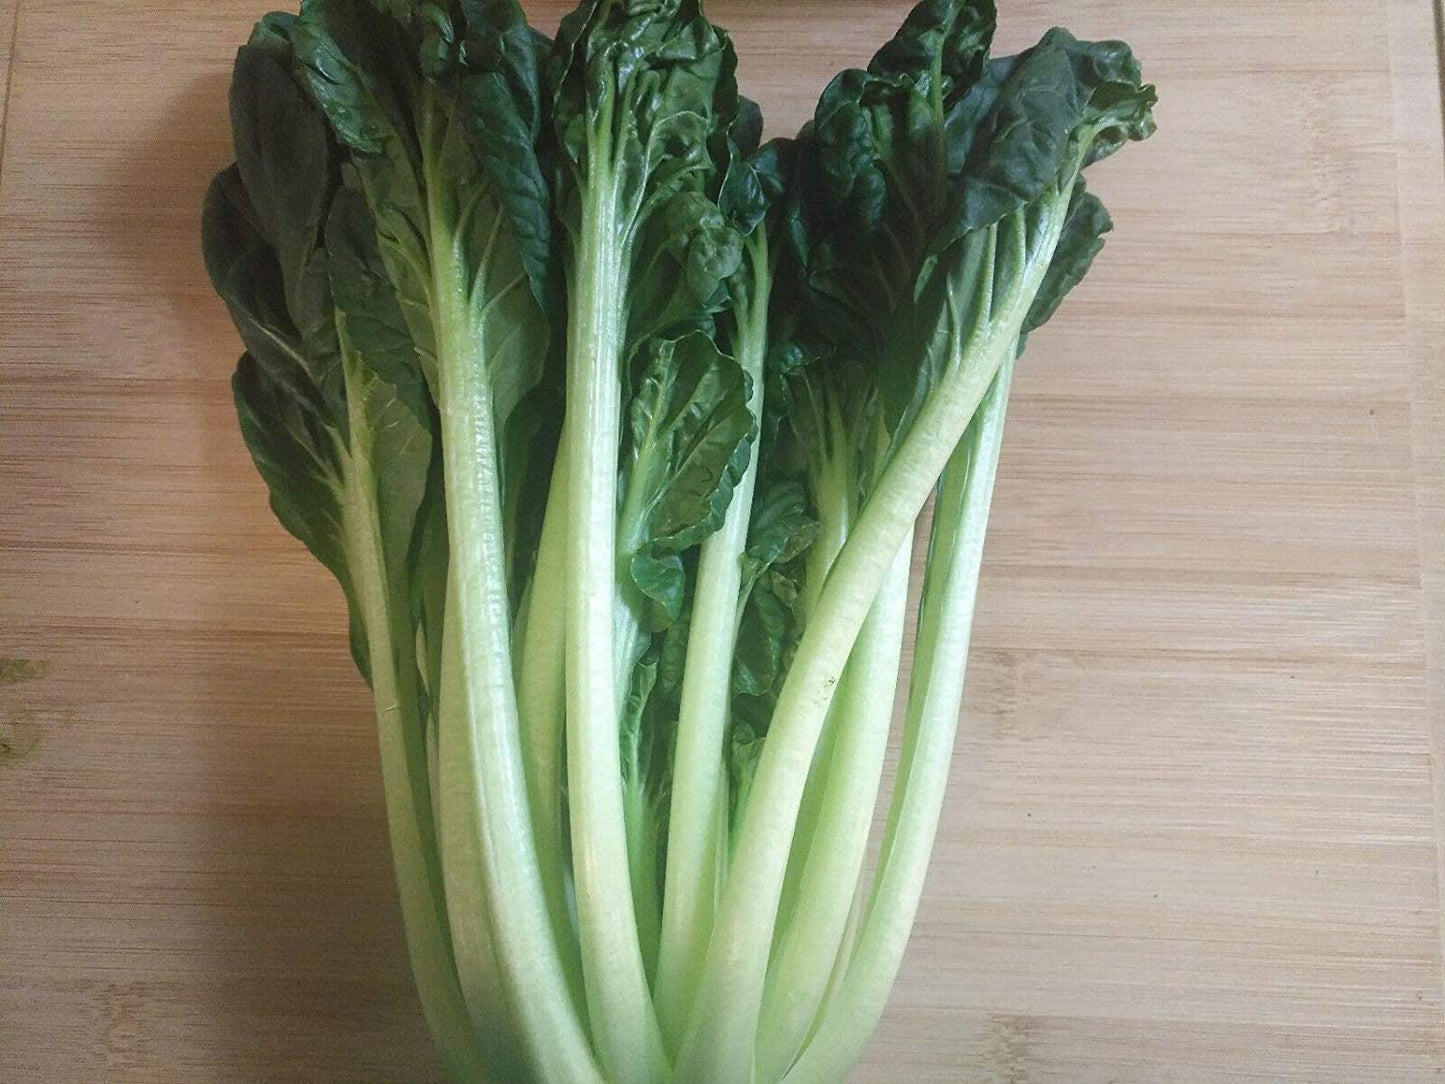 Hundredfold Tatsoi Chinese Cabbage 500 Vegetable Seeds - Brassica rapa, Pakchoi Pak Choi Heirloom Non-GMO Rosette Bok Choy, or Spinach Mustard for Home Garden Yard Balcony & Indoor Planting